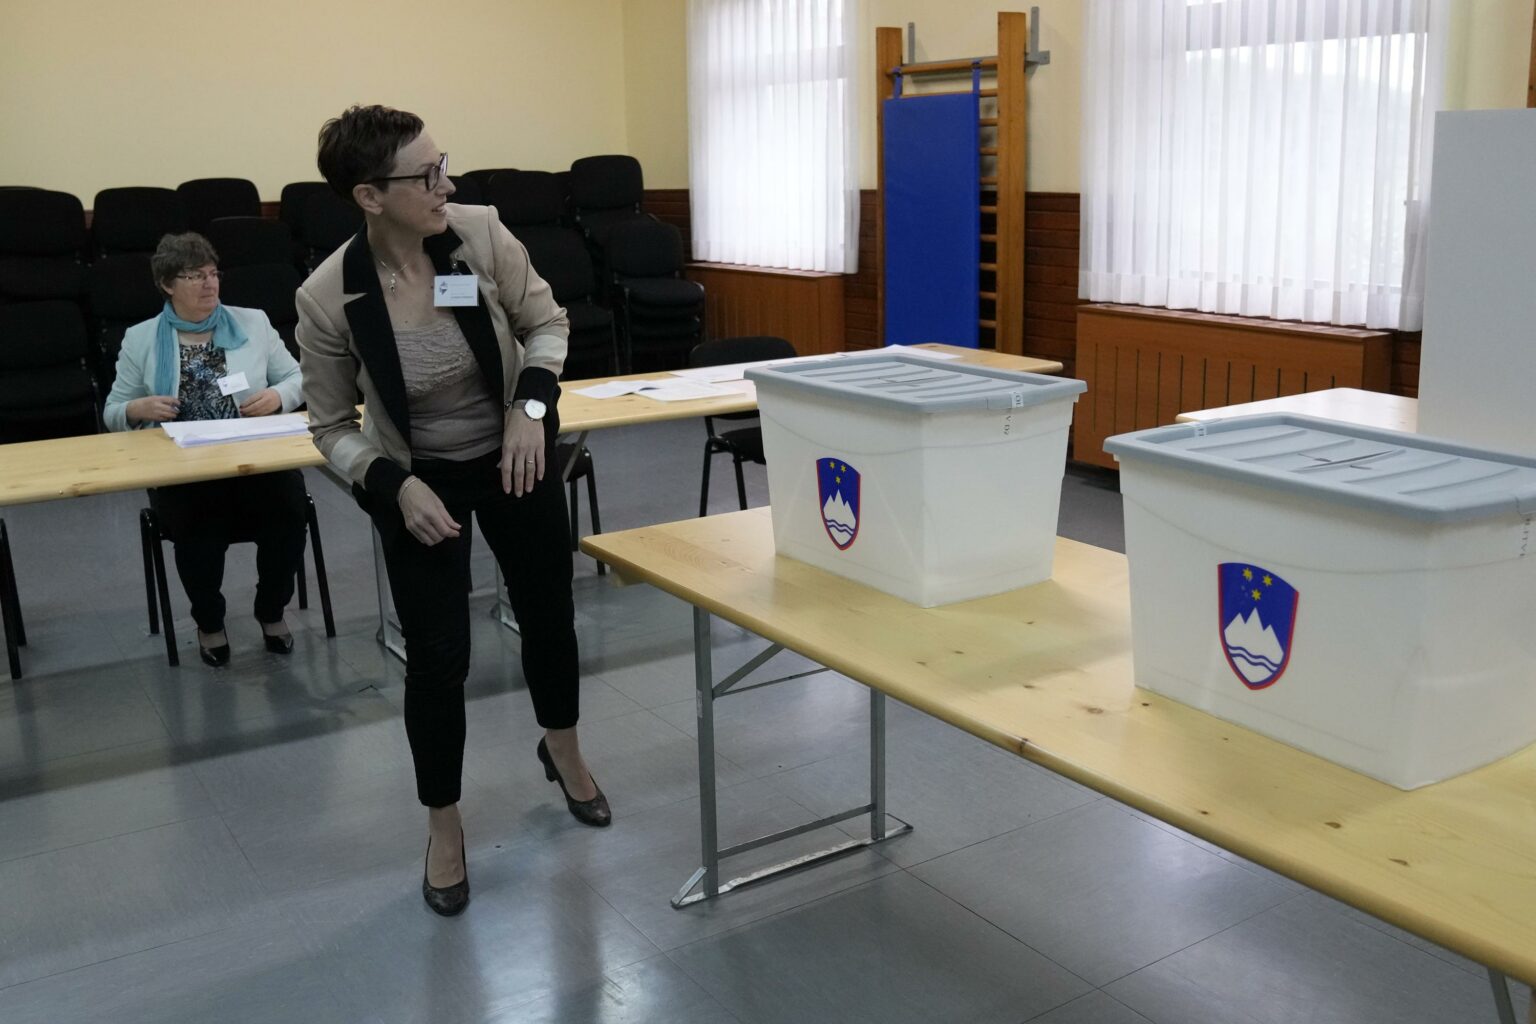 Slovenians vote in a tight race between populists, liberals